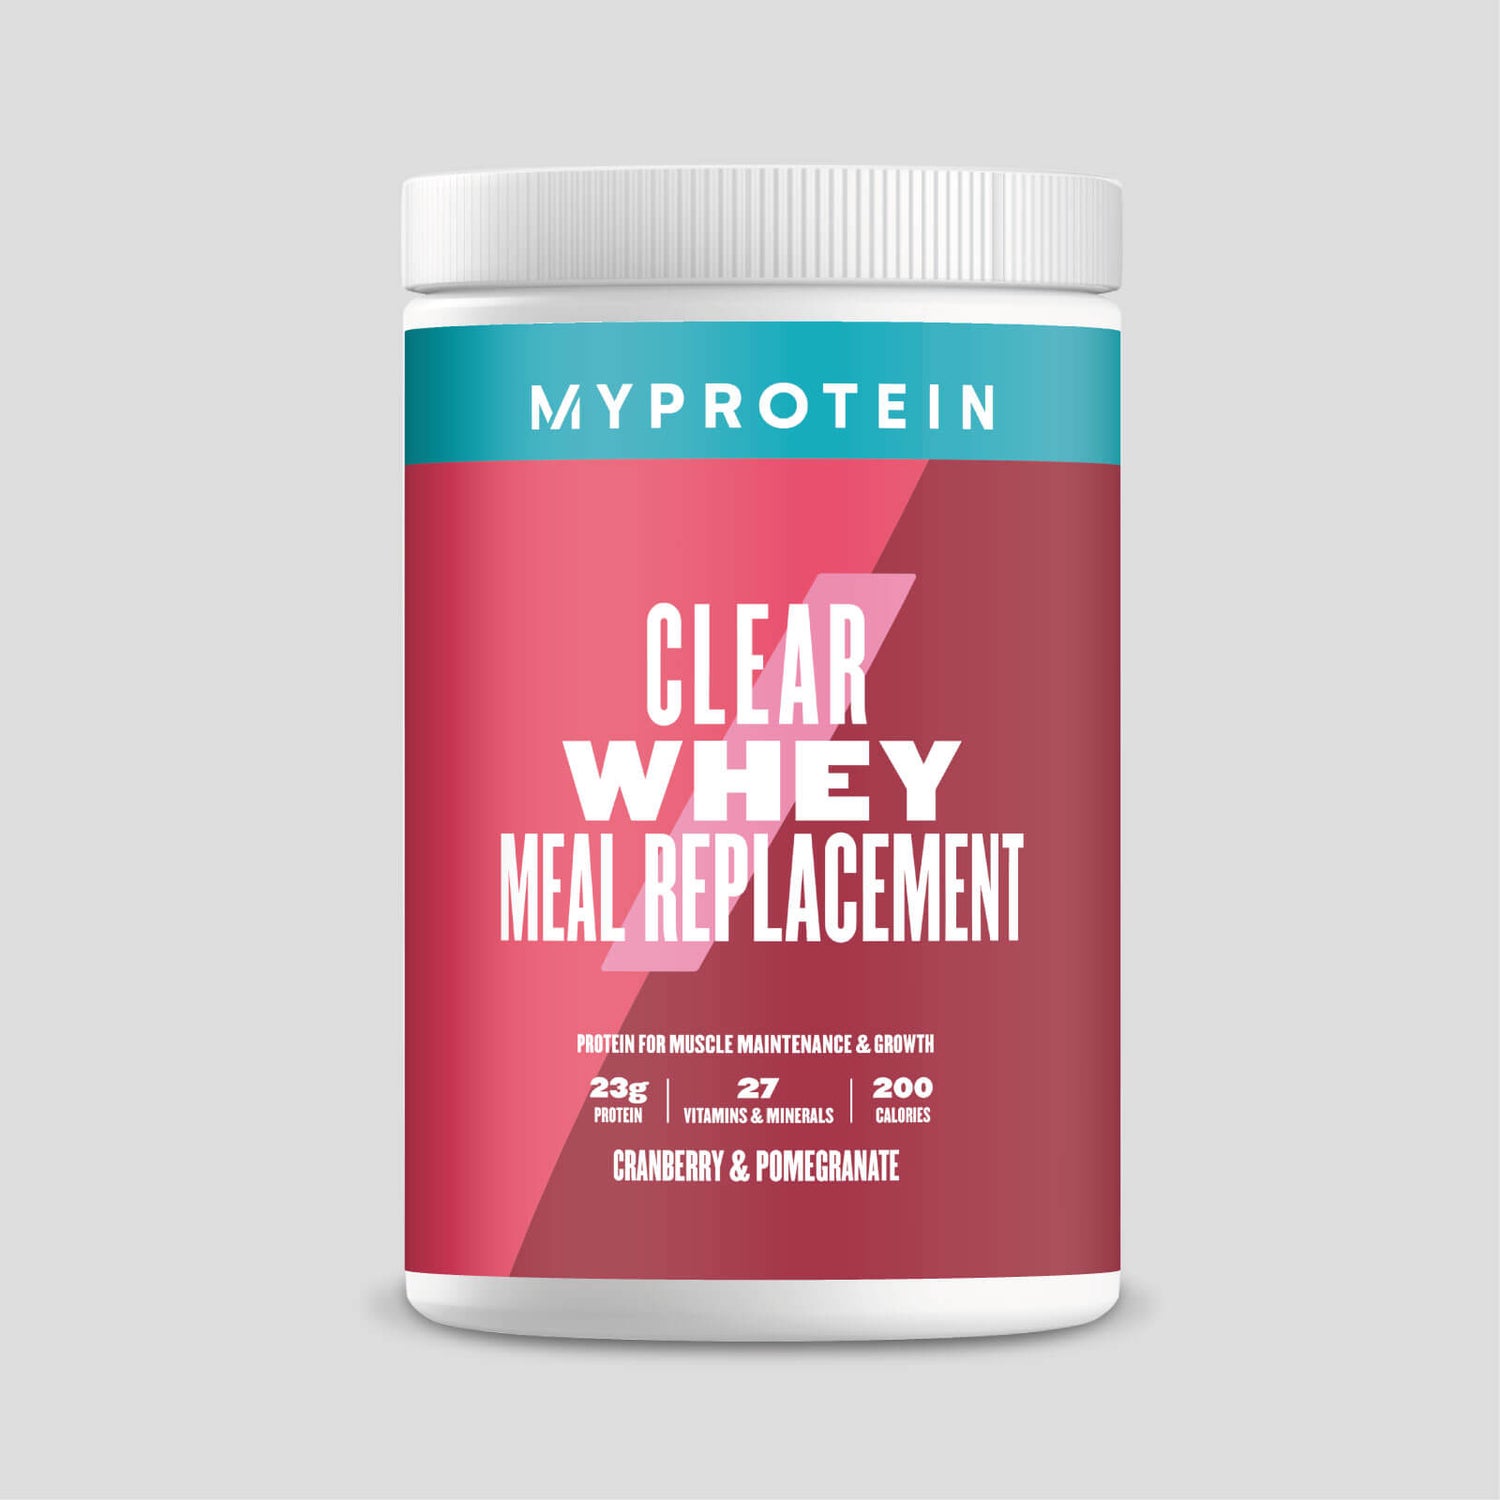 Myprotein Clear Whey Meal Replacement Shake